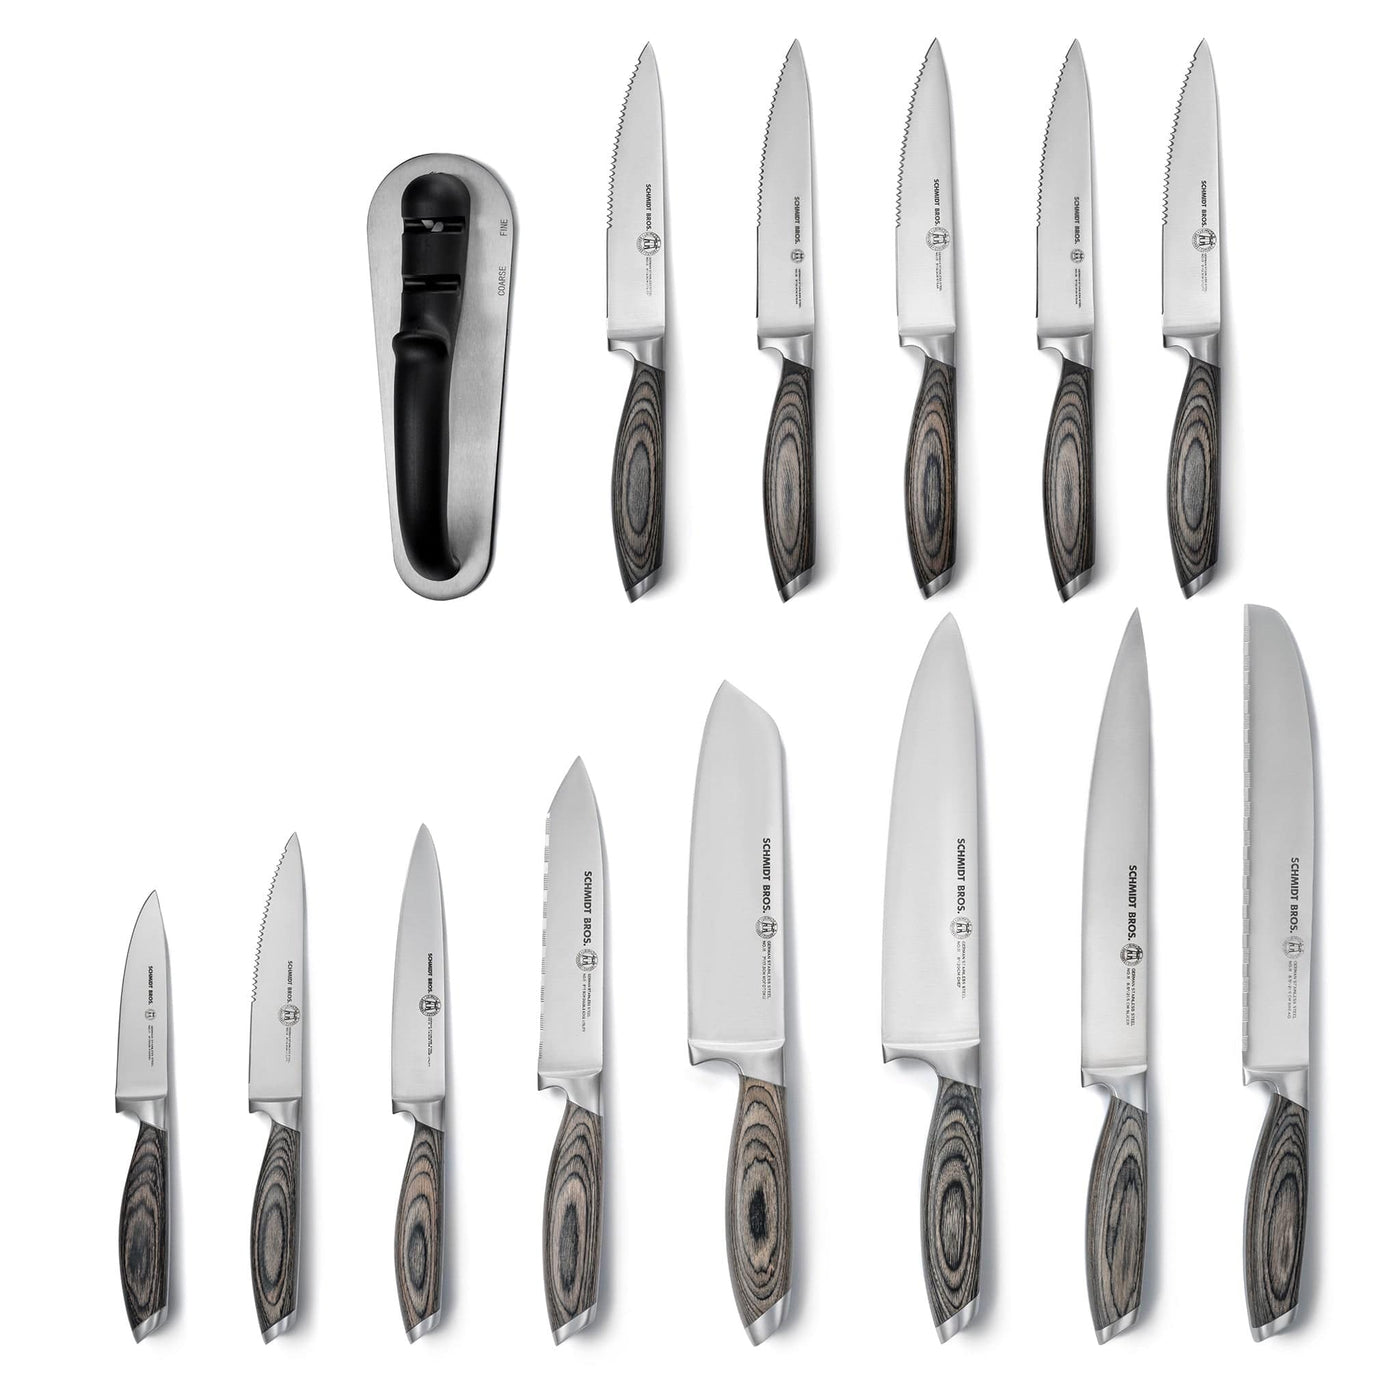 Schmidt Brothers Kitchen Cutlery Schmidt Brothers, Bonded Ash, 15-Piece Knife Set, High-Carbon Stainless Steel Cutlery with Black Ash Wood and Acrylic Magnetic Knife Block